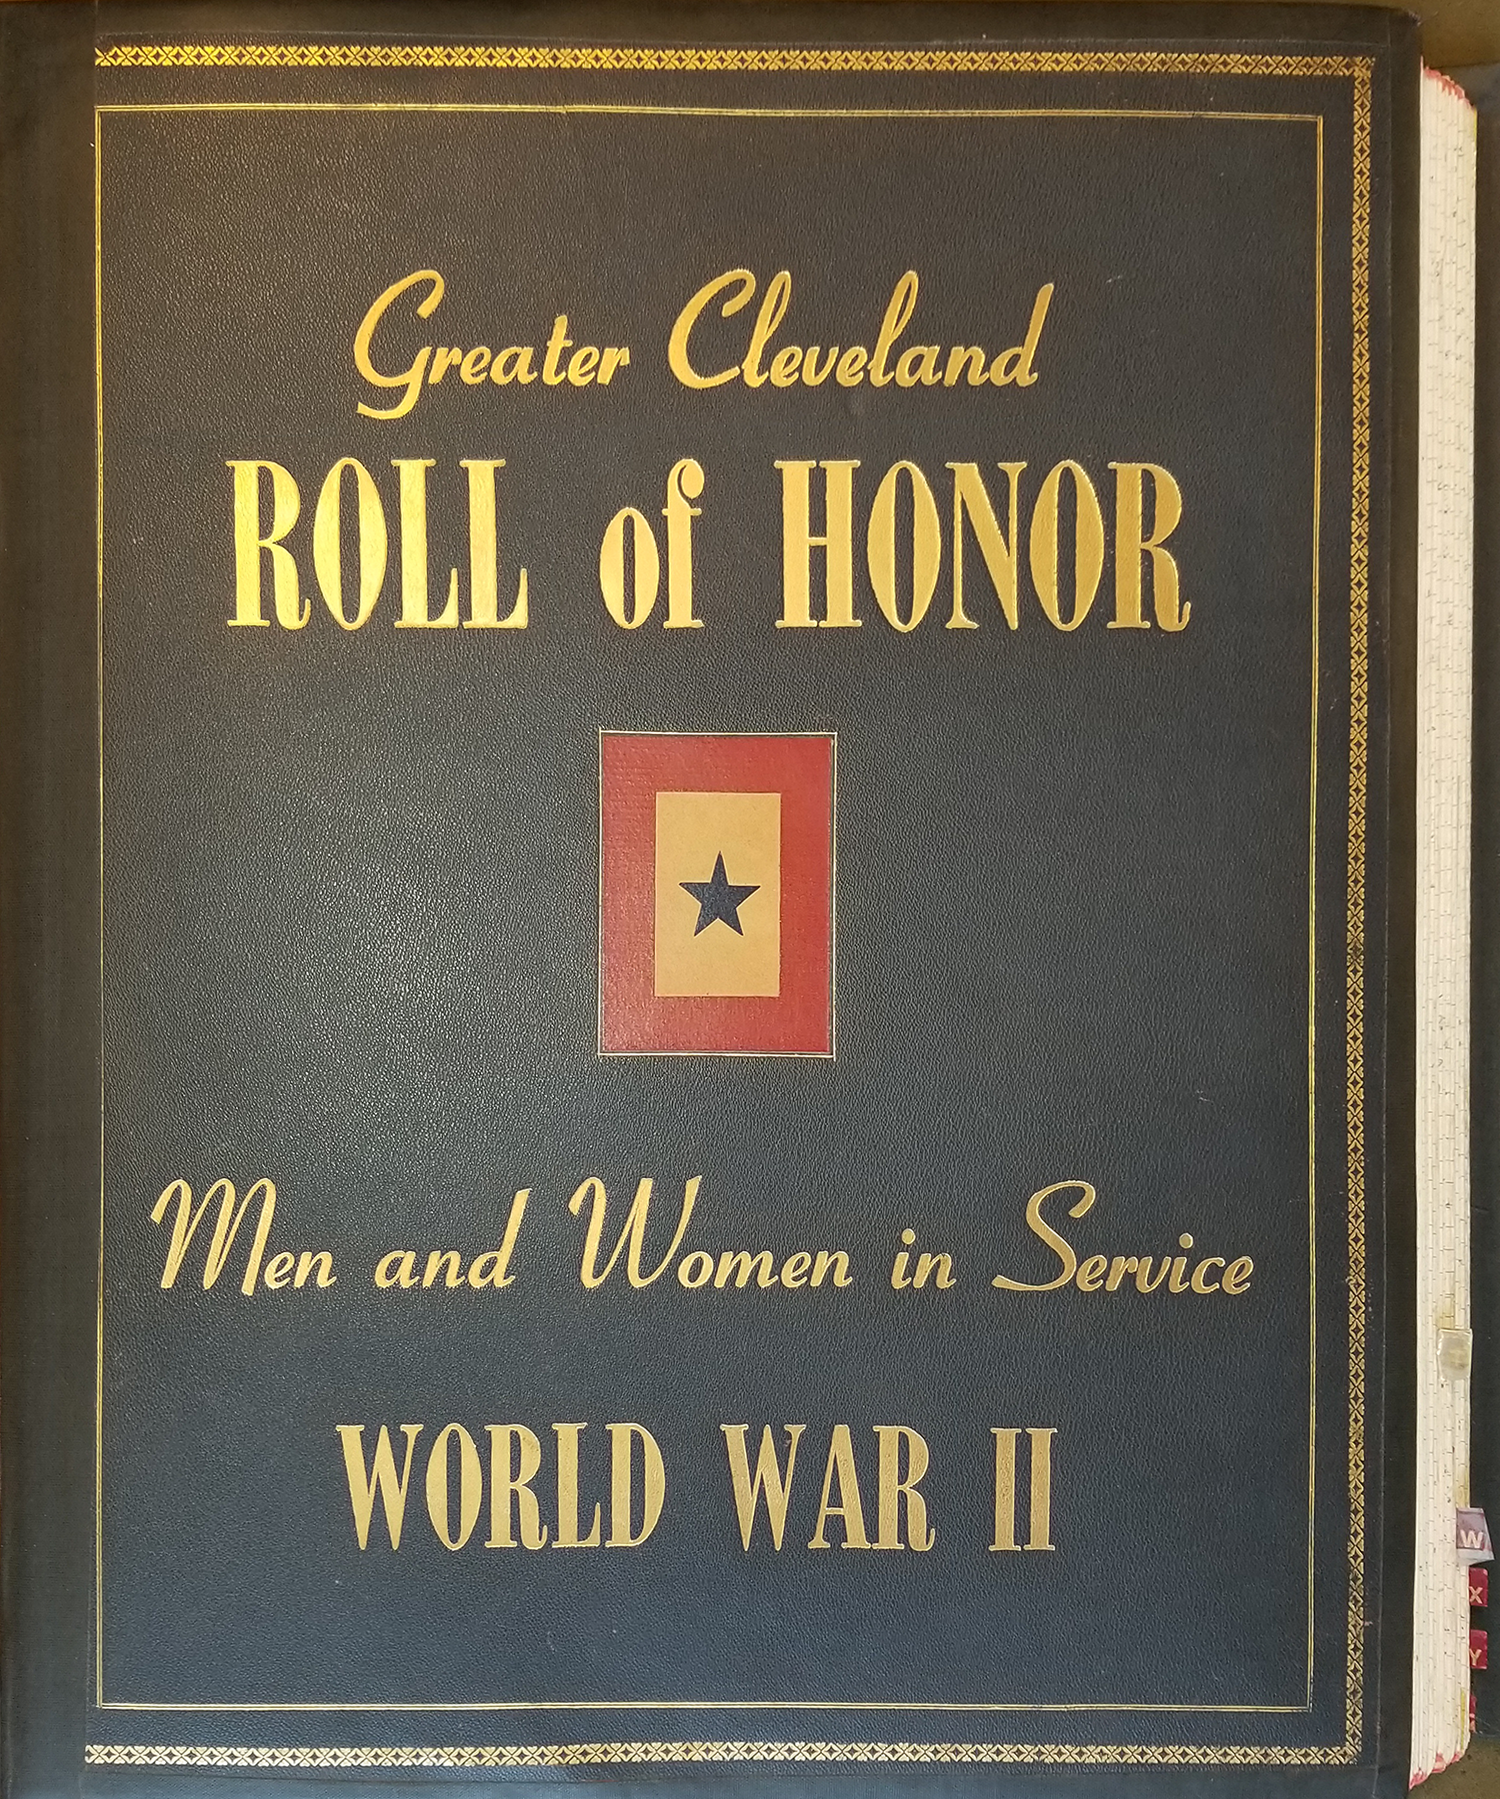 Roll of Honor (book jacket with gold letters on black leather-like fabric).